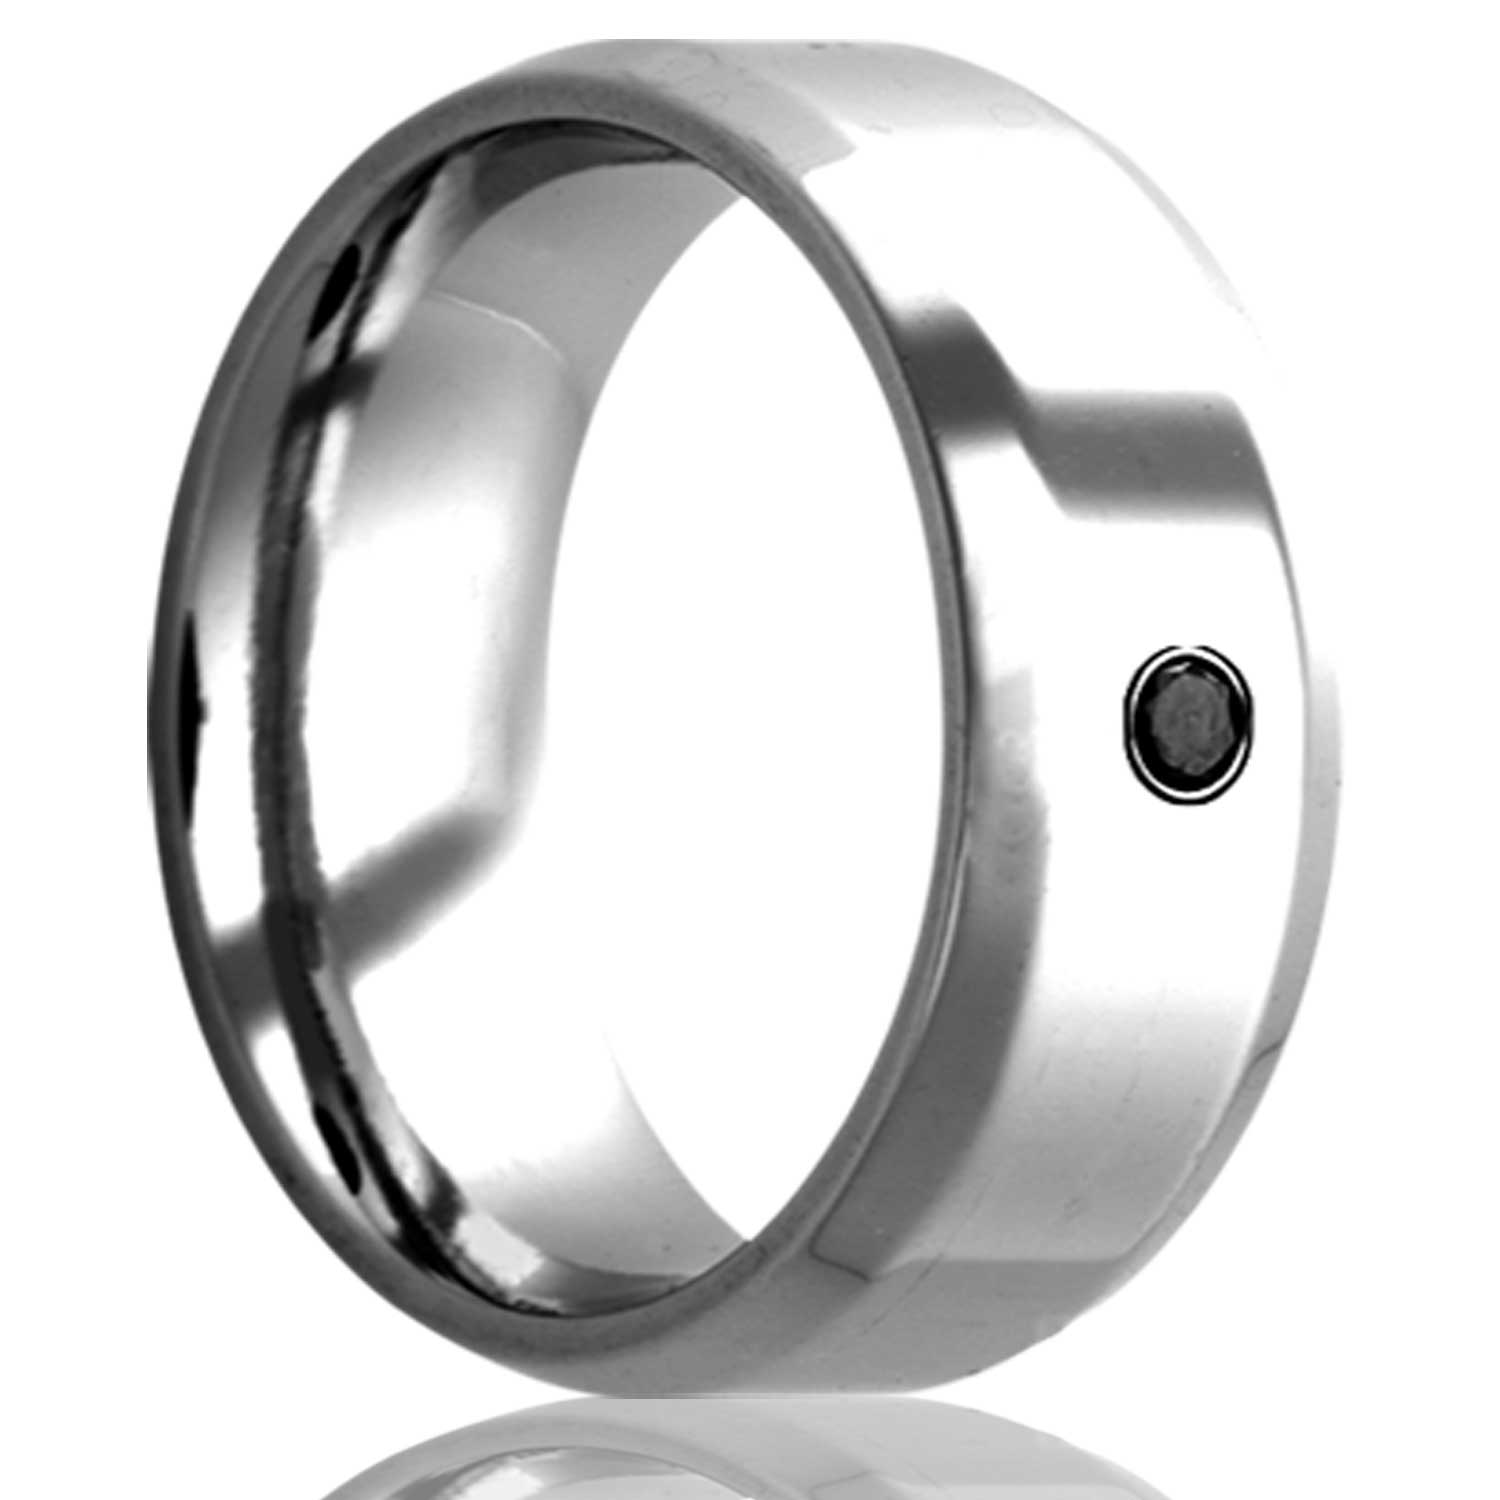 A cobalt wedding band with beveled edges & black diamond displayed on a neutral white background.